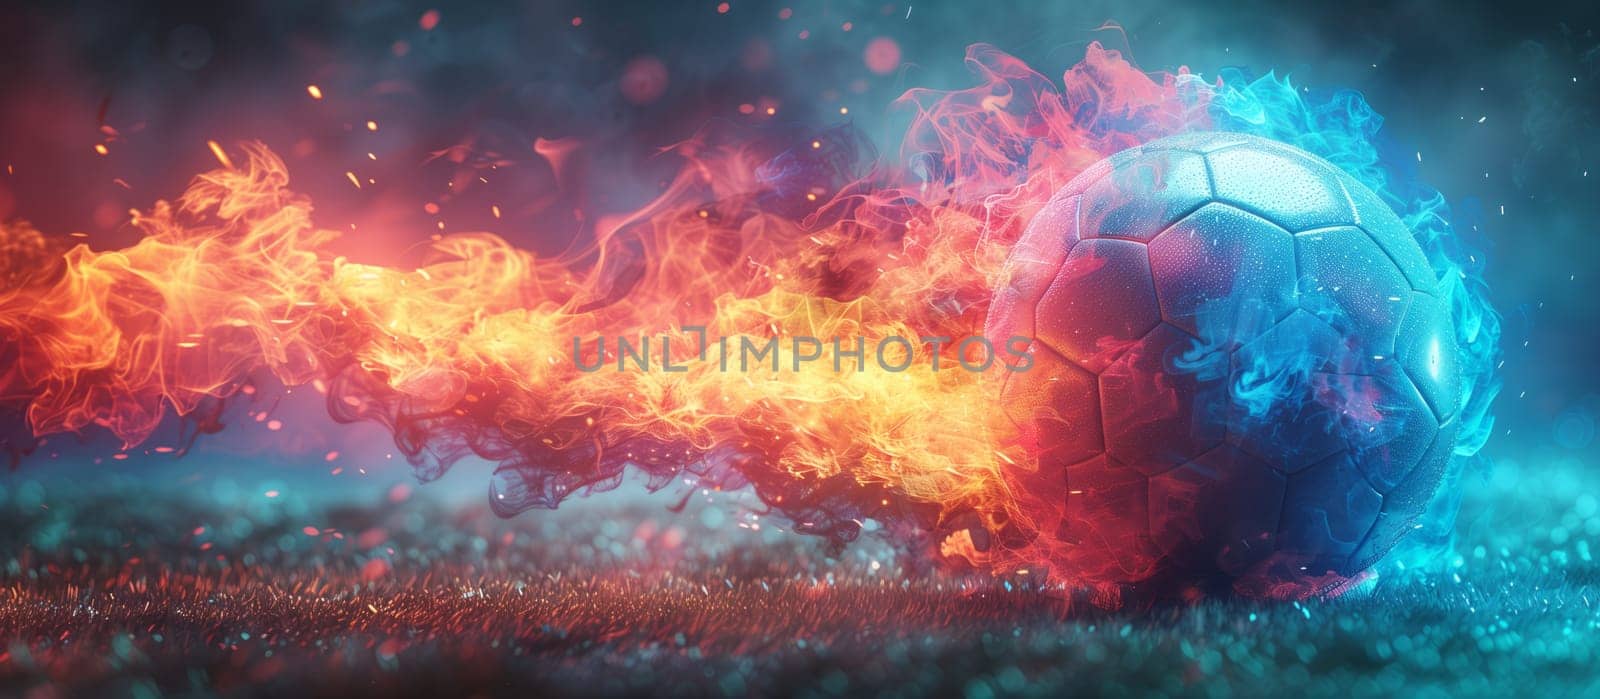 The soccer ball is engulfed in flames, creating a fiery atmosphere on the field. The heat and intensity mimic a gas cloud in the sky